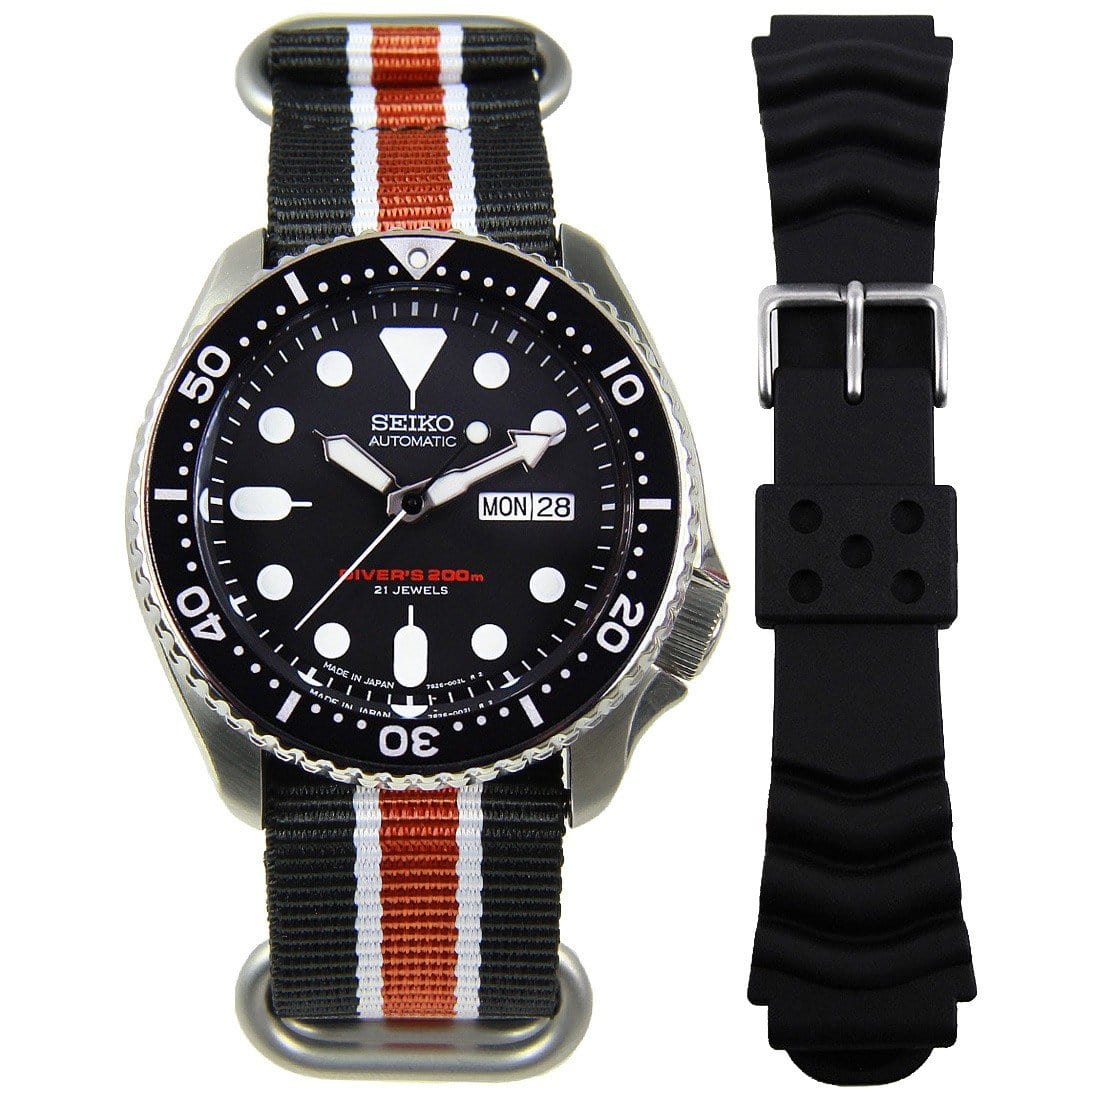 Seiko Automatic Diving Sports Watch with Extra Strap SKX007J1 SKX007J